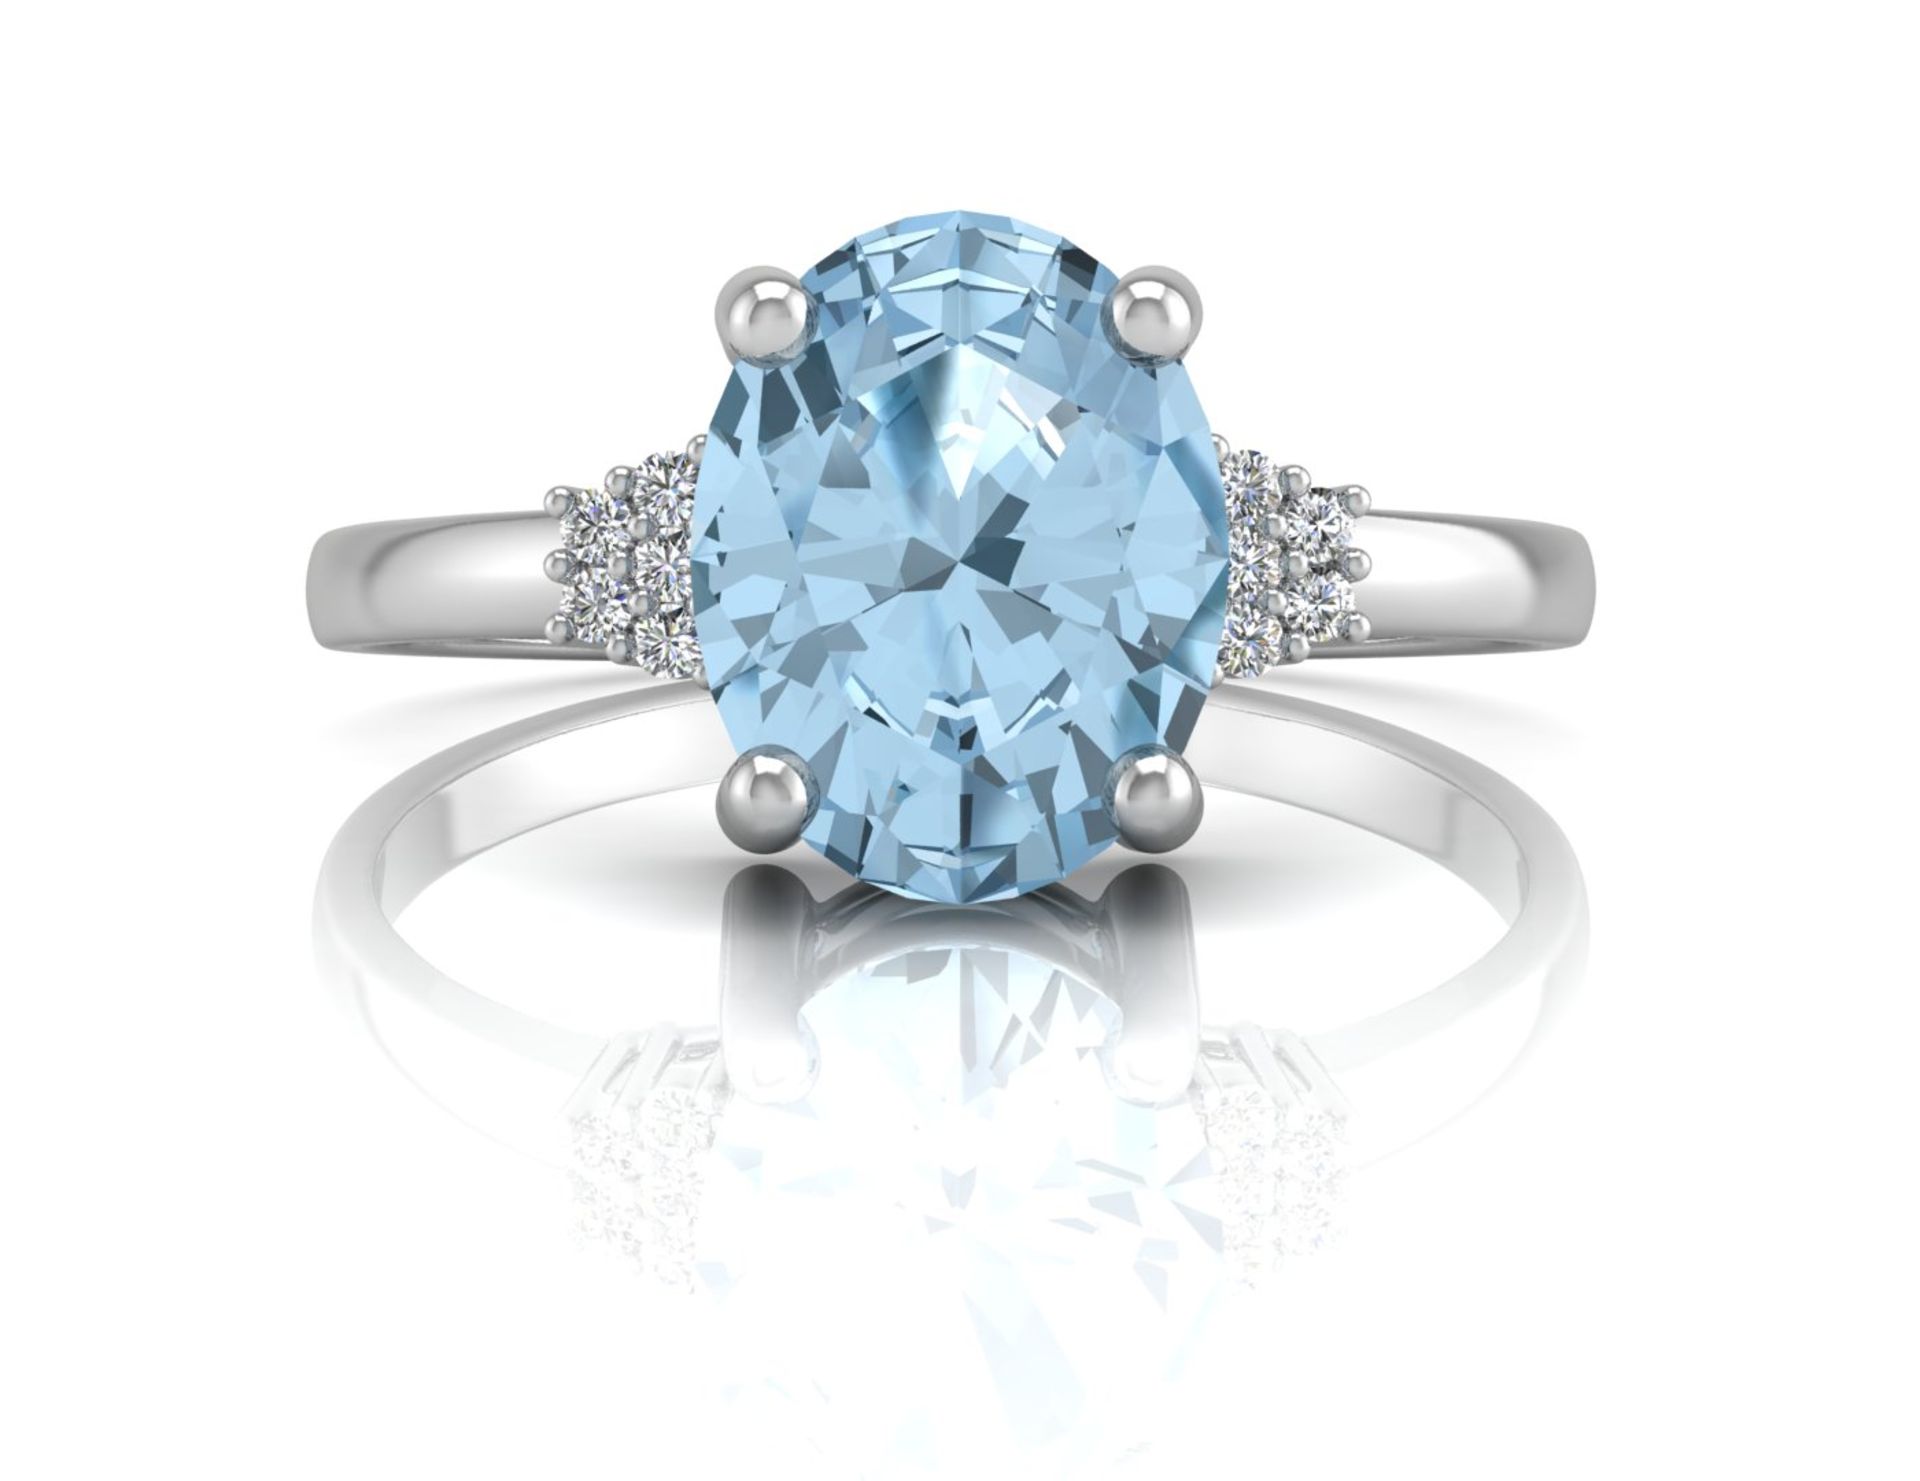 9ct White Gold Diamond And Blue Topaz Ring 0.03 Carats - Valued by AGI £795.00 - 9ct White Gold - Image 4 of 4